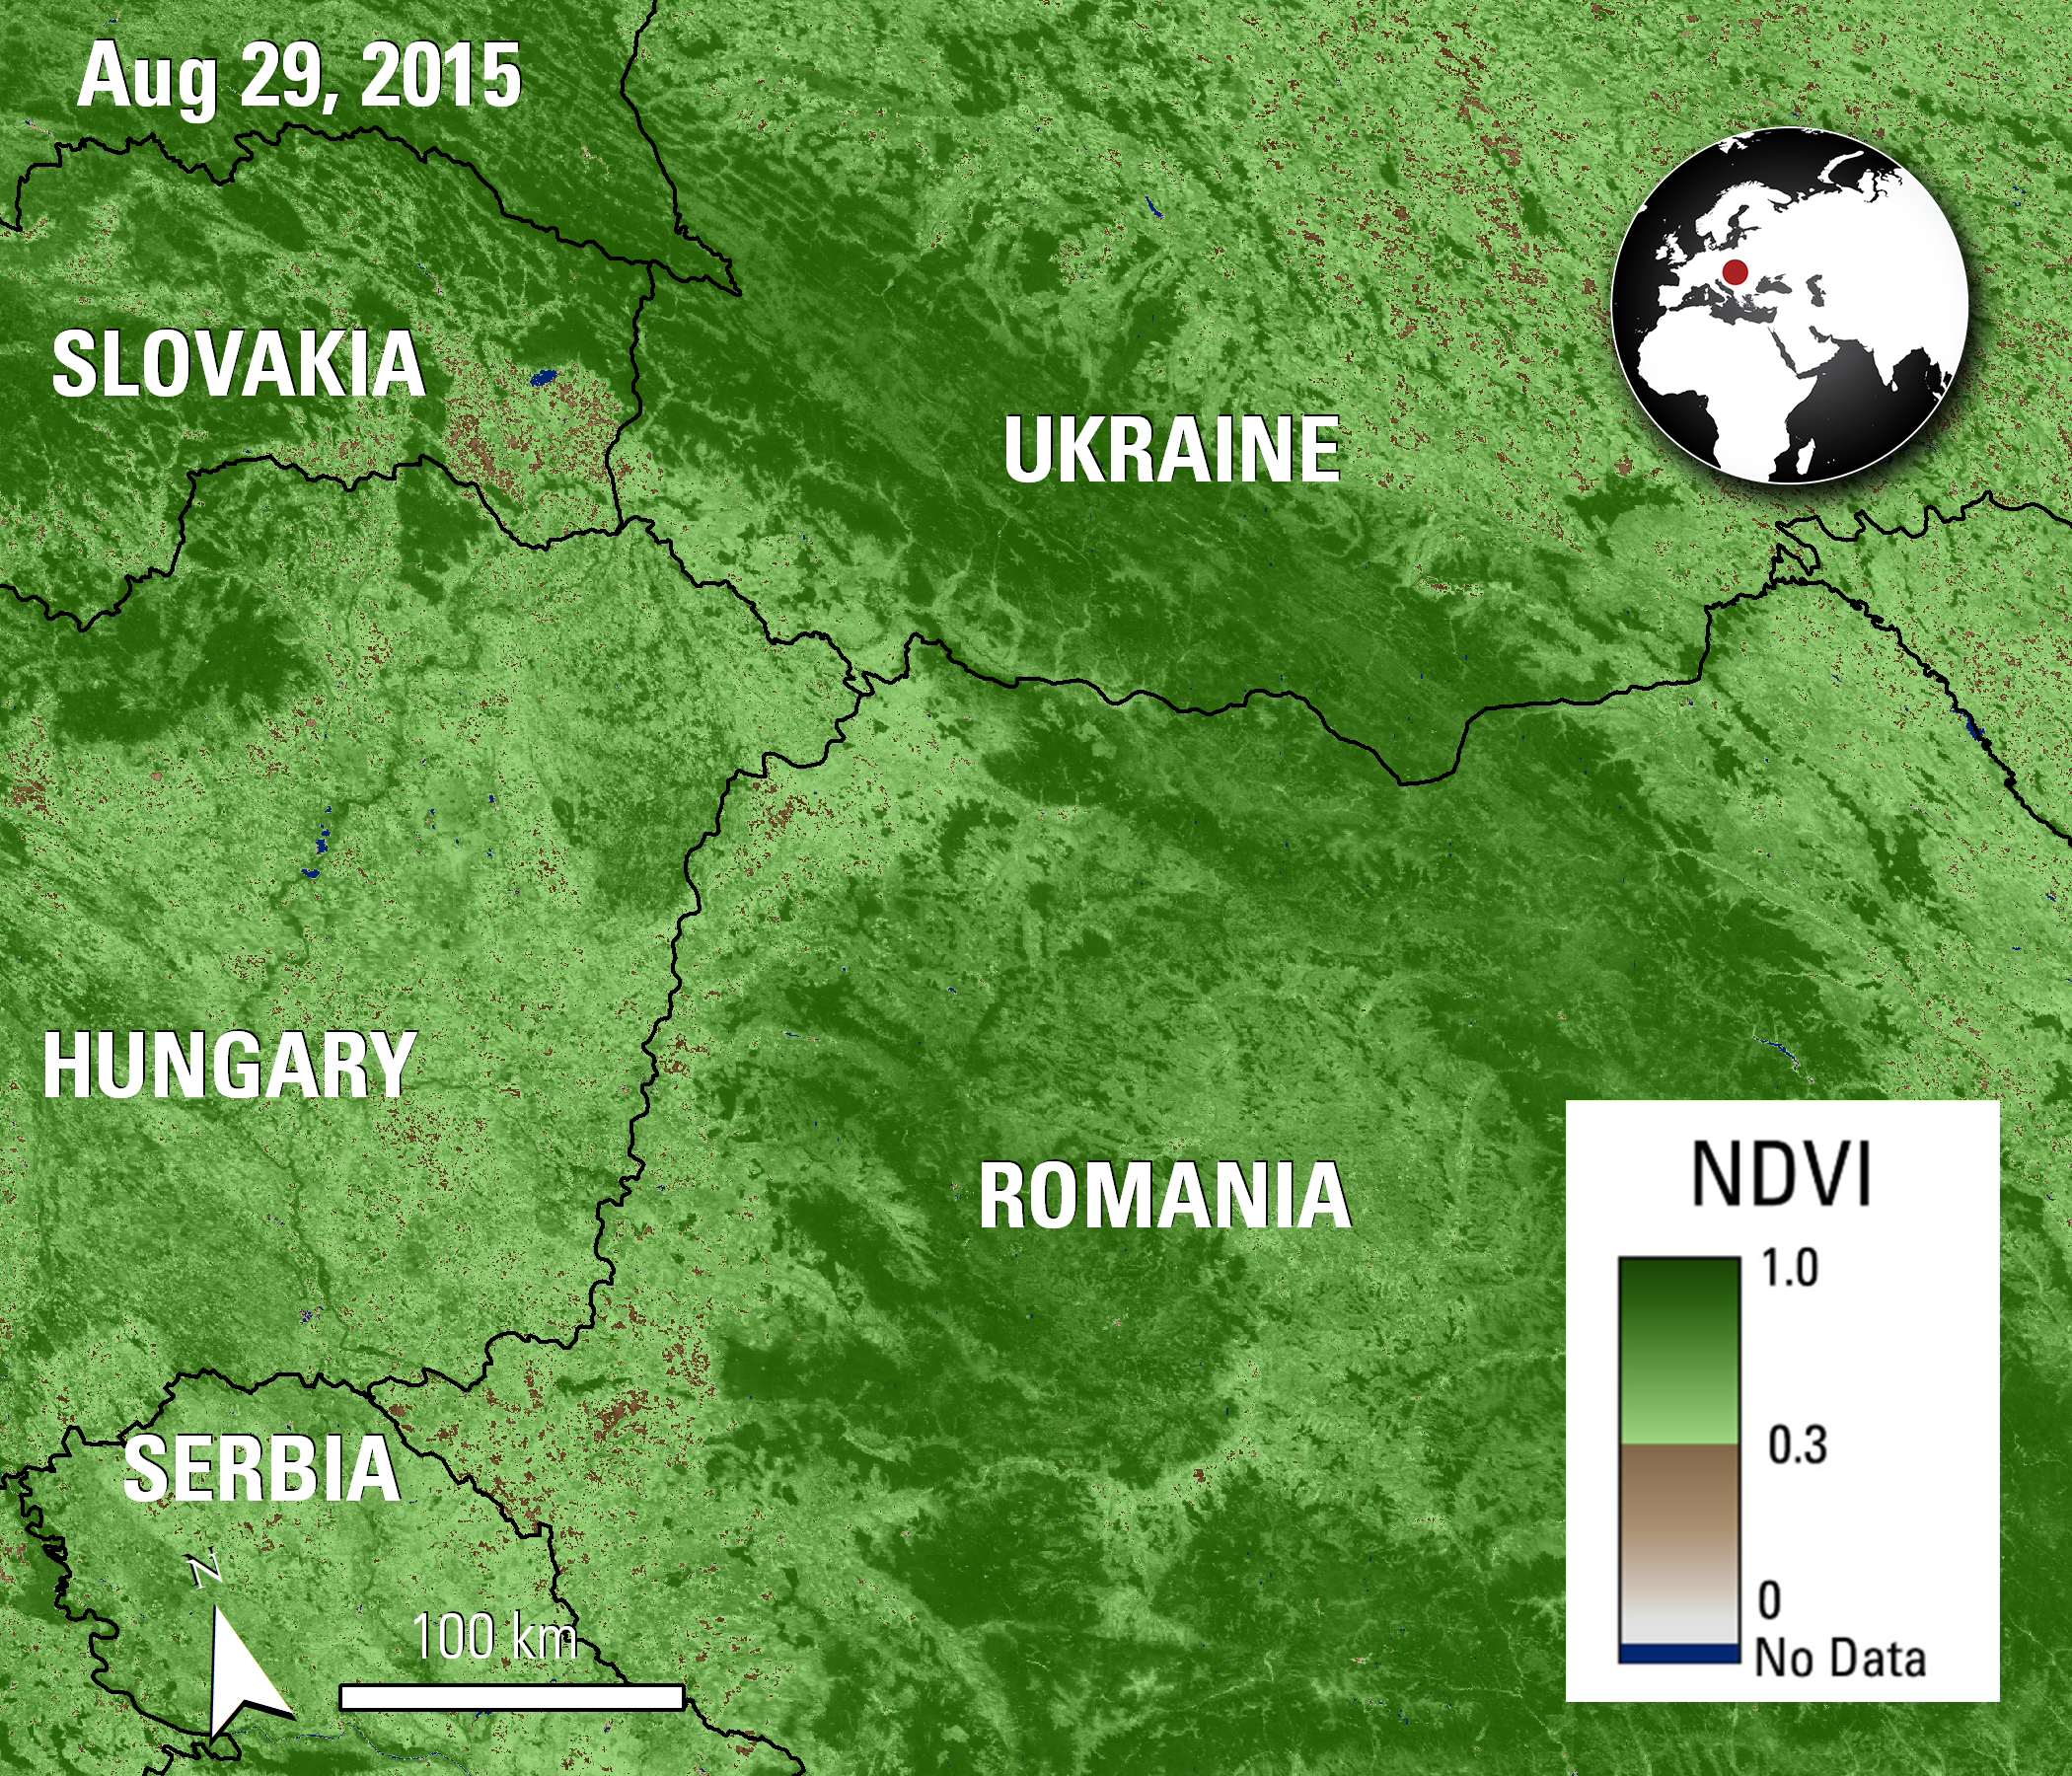 MOD13Q1 product, acquired on August 29, 2015 over Eastern Europe.